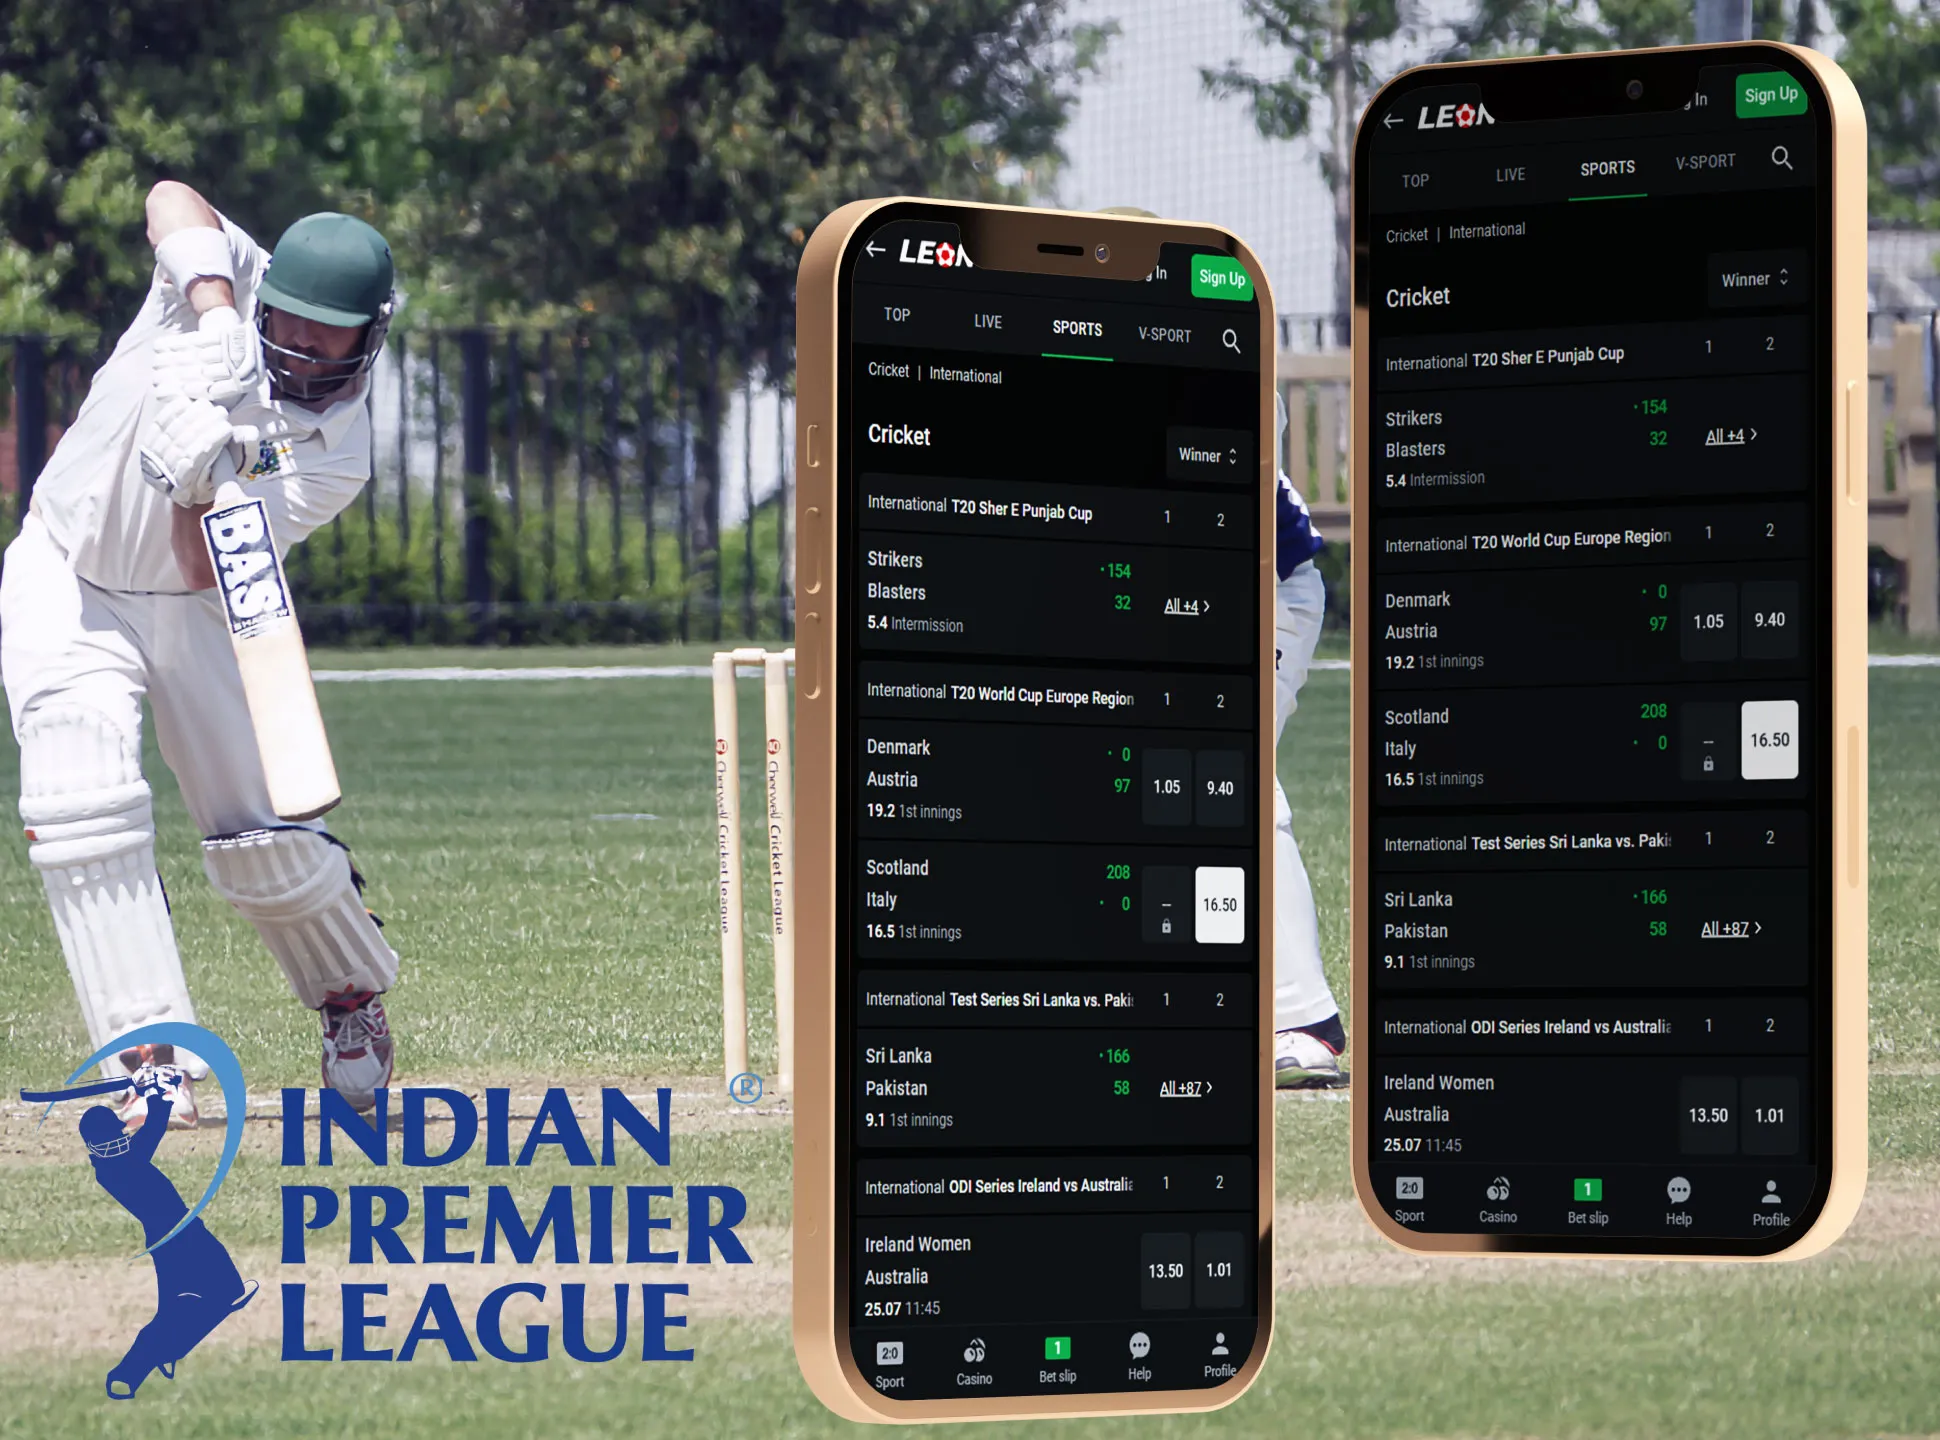 Download the Leonbet app to place bets on IPL via your smartphone.